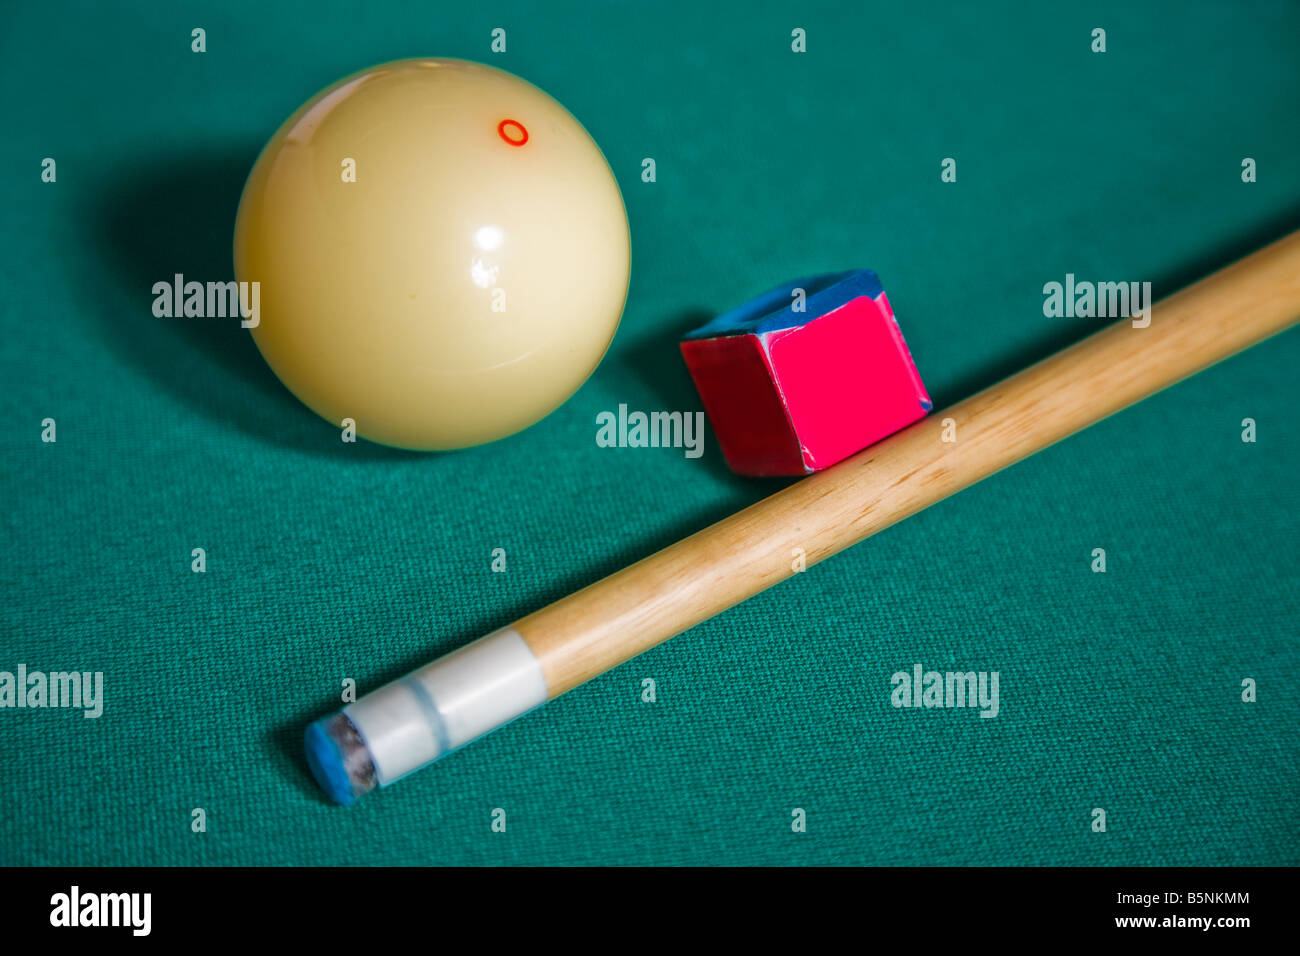 pool hall billiards cue green explode ball shoot concentrate Stock Photo